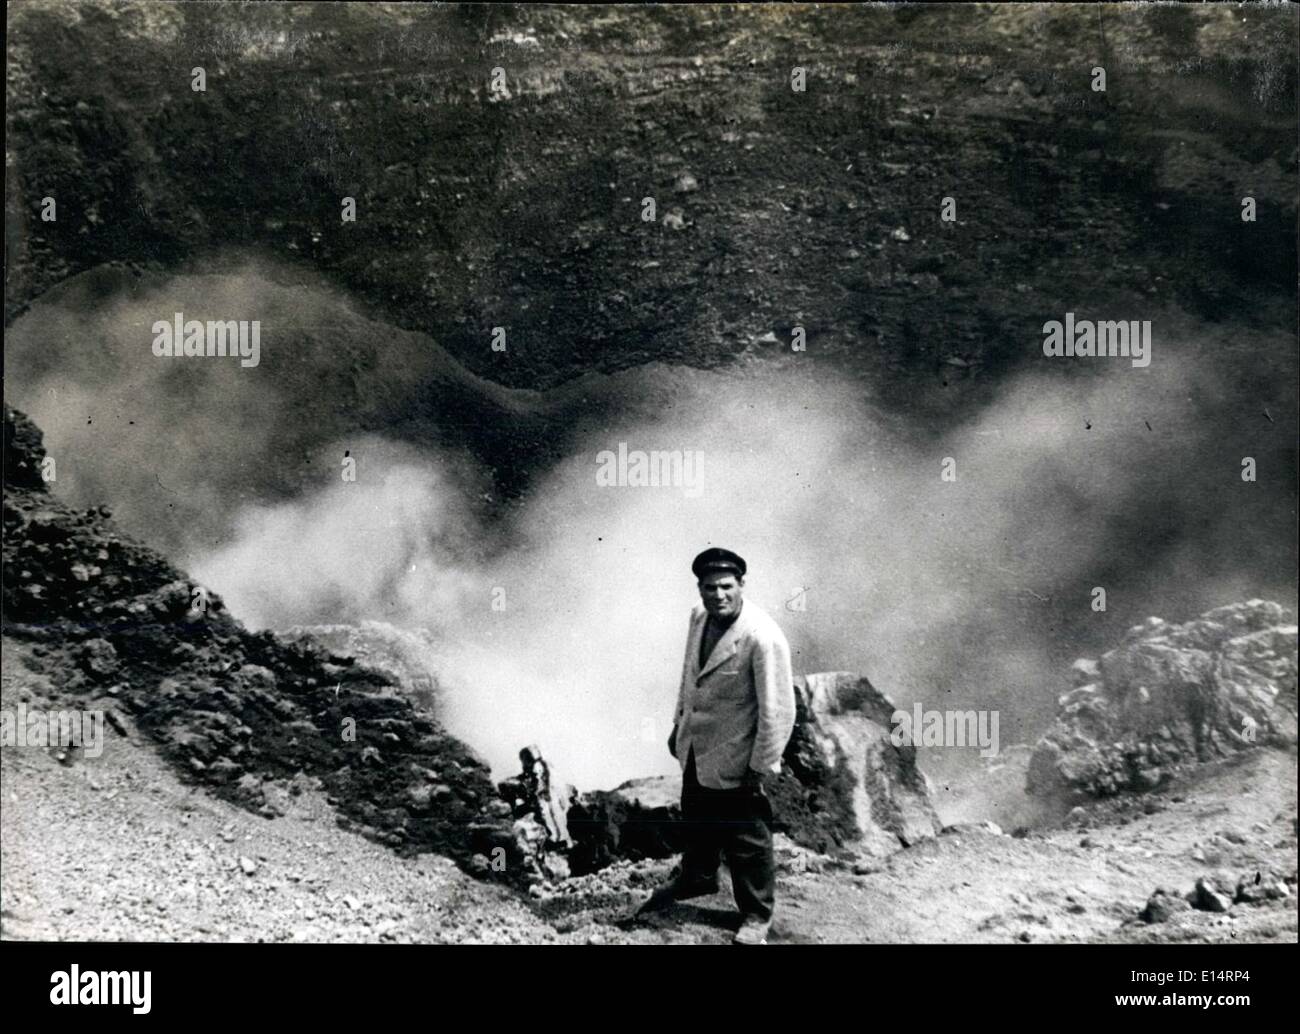 Apr. 18, 2012 - One of the most vivid Scenes Shown during the broadcast Showing a commentator who has climbed out of the Smoking Crater of Vesuvius. Steam escapes from the fissures in side of the Crater,indicating the extreme heat beneath the surface of the earth. To show the heat an egg was fried on the ground. Stock Photo